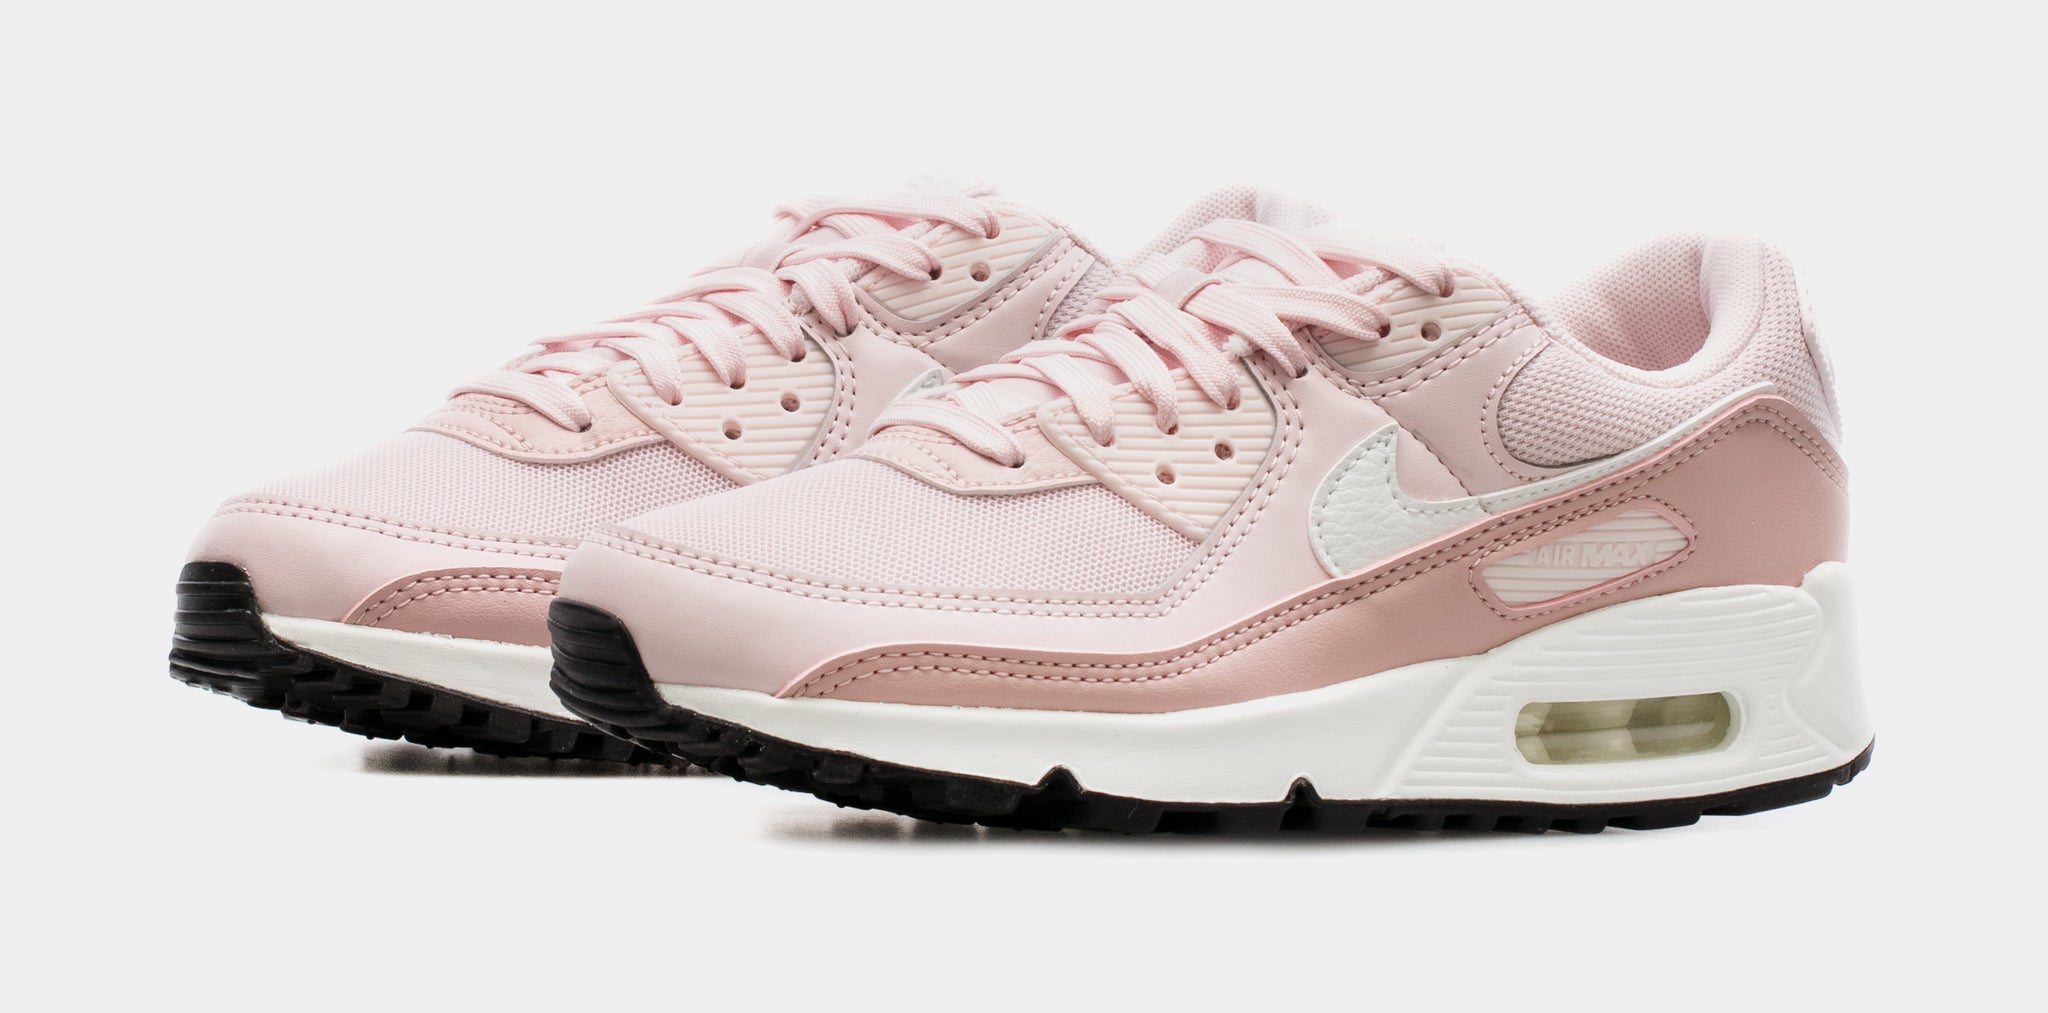 Nike Air Max Womens Lifestyle Shoes Pink DH8010-600 – Shoe Palace